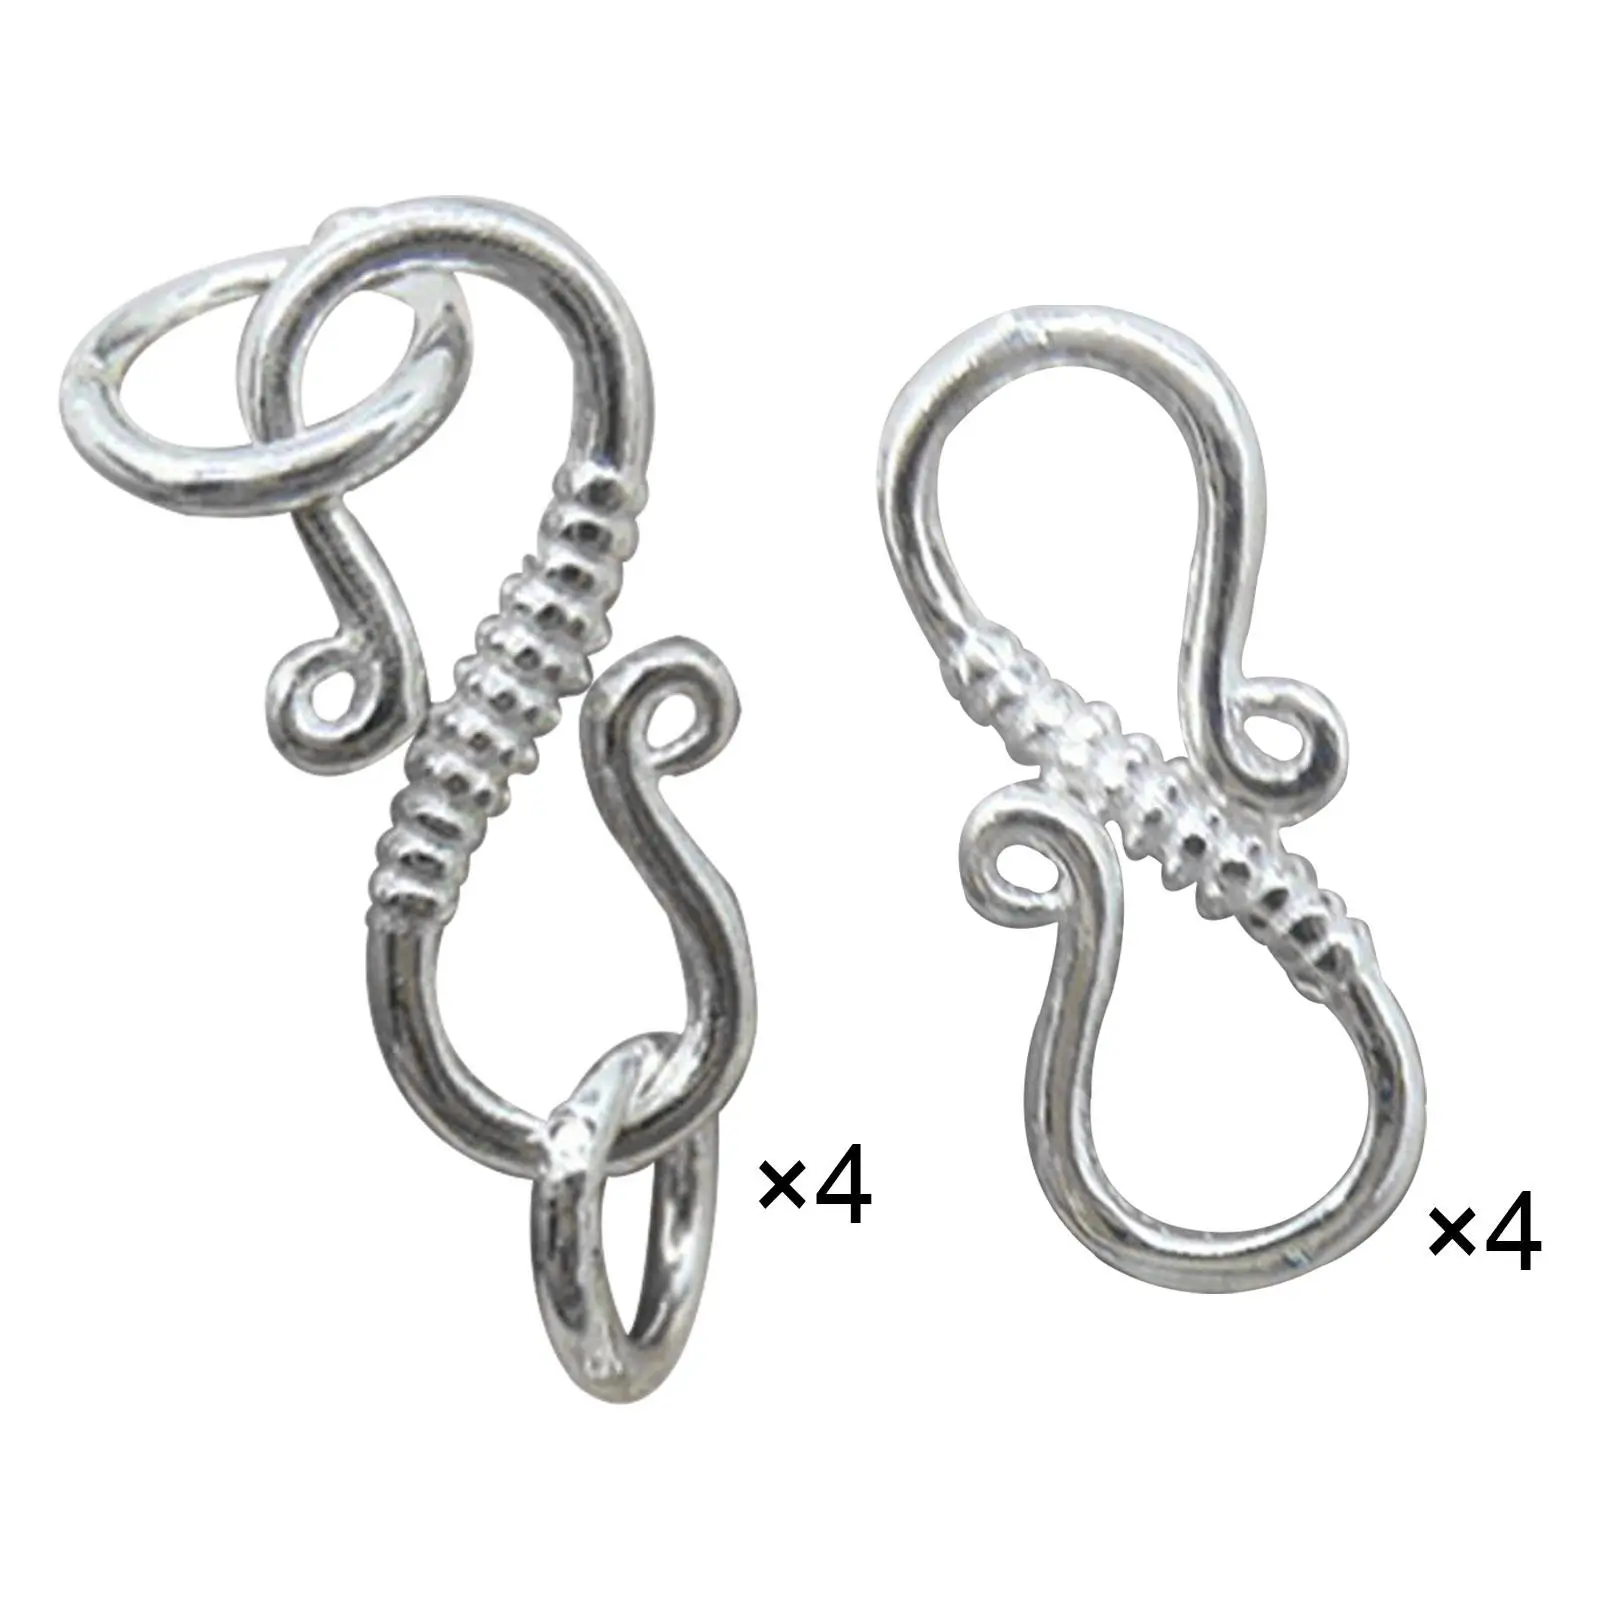 4x Sterling Silver S Hook Clasp 12mm Eye Clasp for Jewelry Clasps DIY Crafts